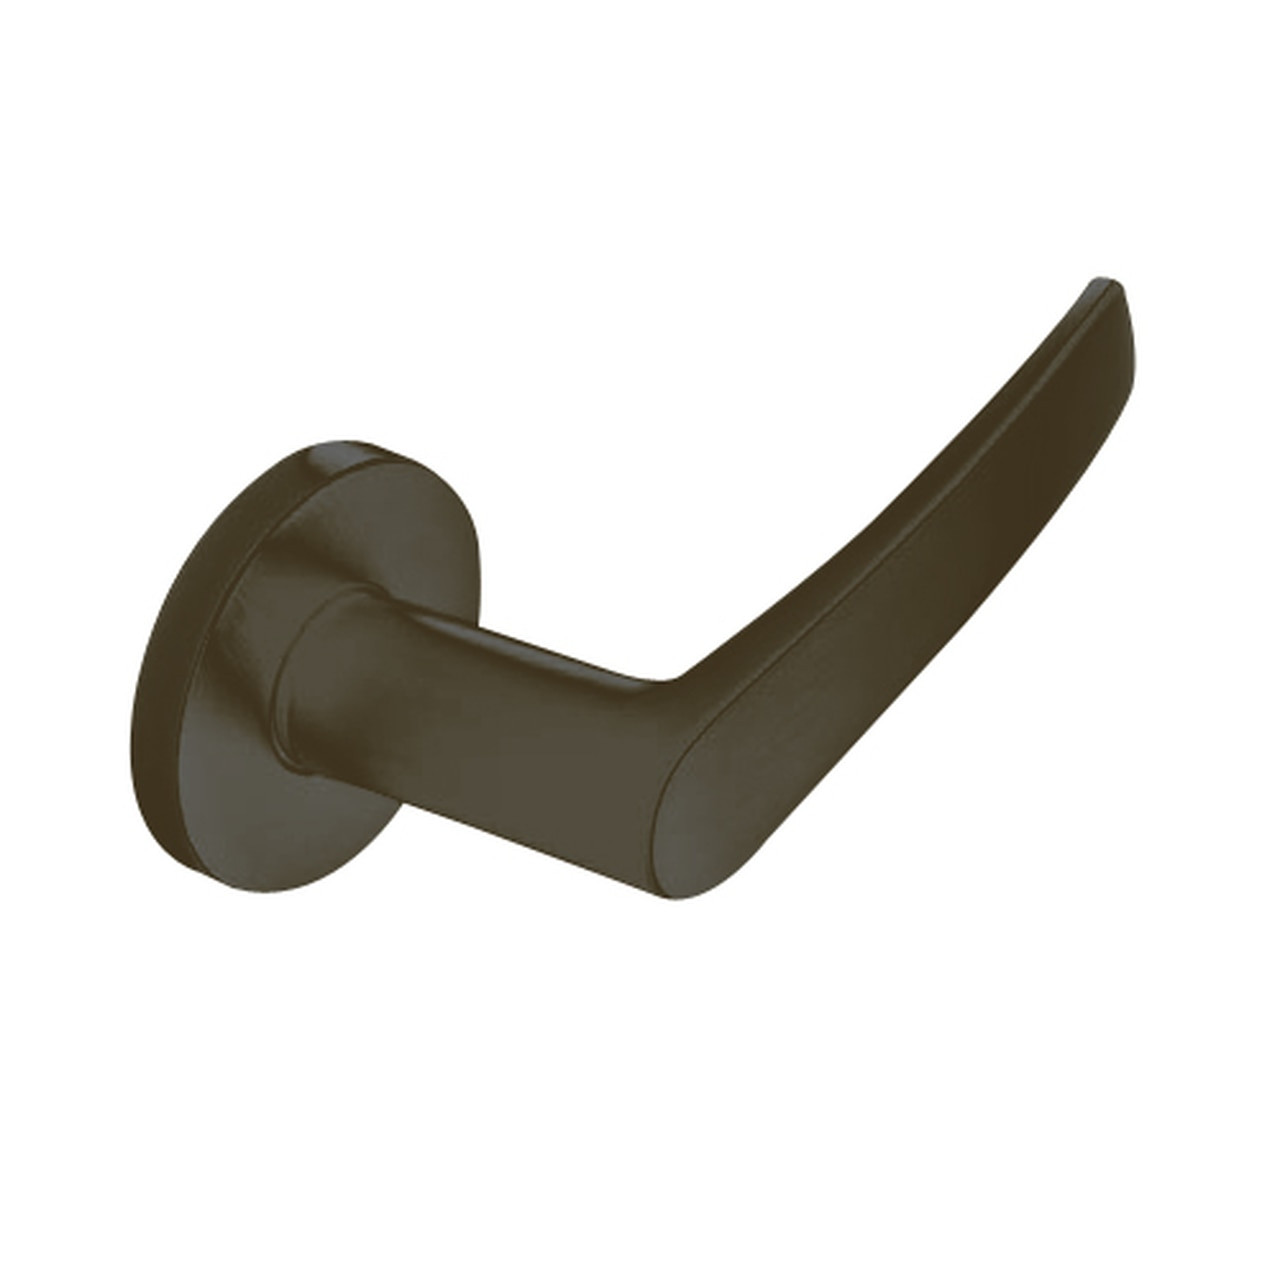 ML2032-ASA-613-LC Corbin Russwin ML2000 Series Mortise Institution Locksets with Armstrong Lever in Oil Rubbed Bronze